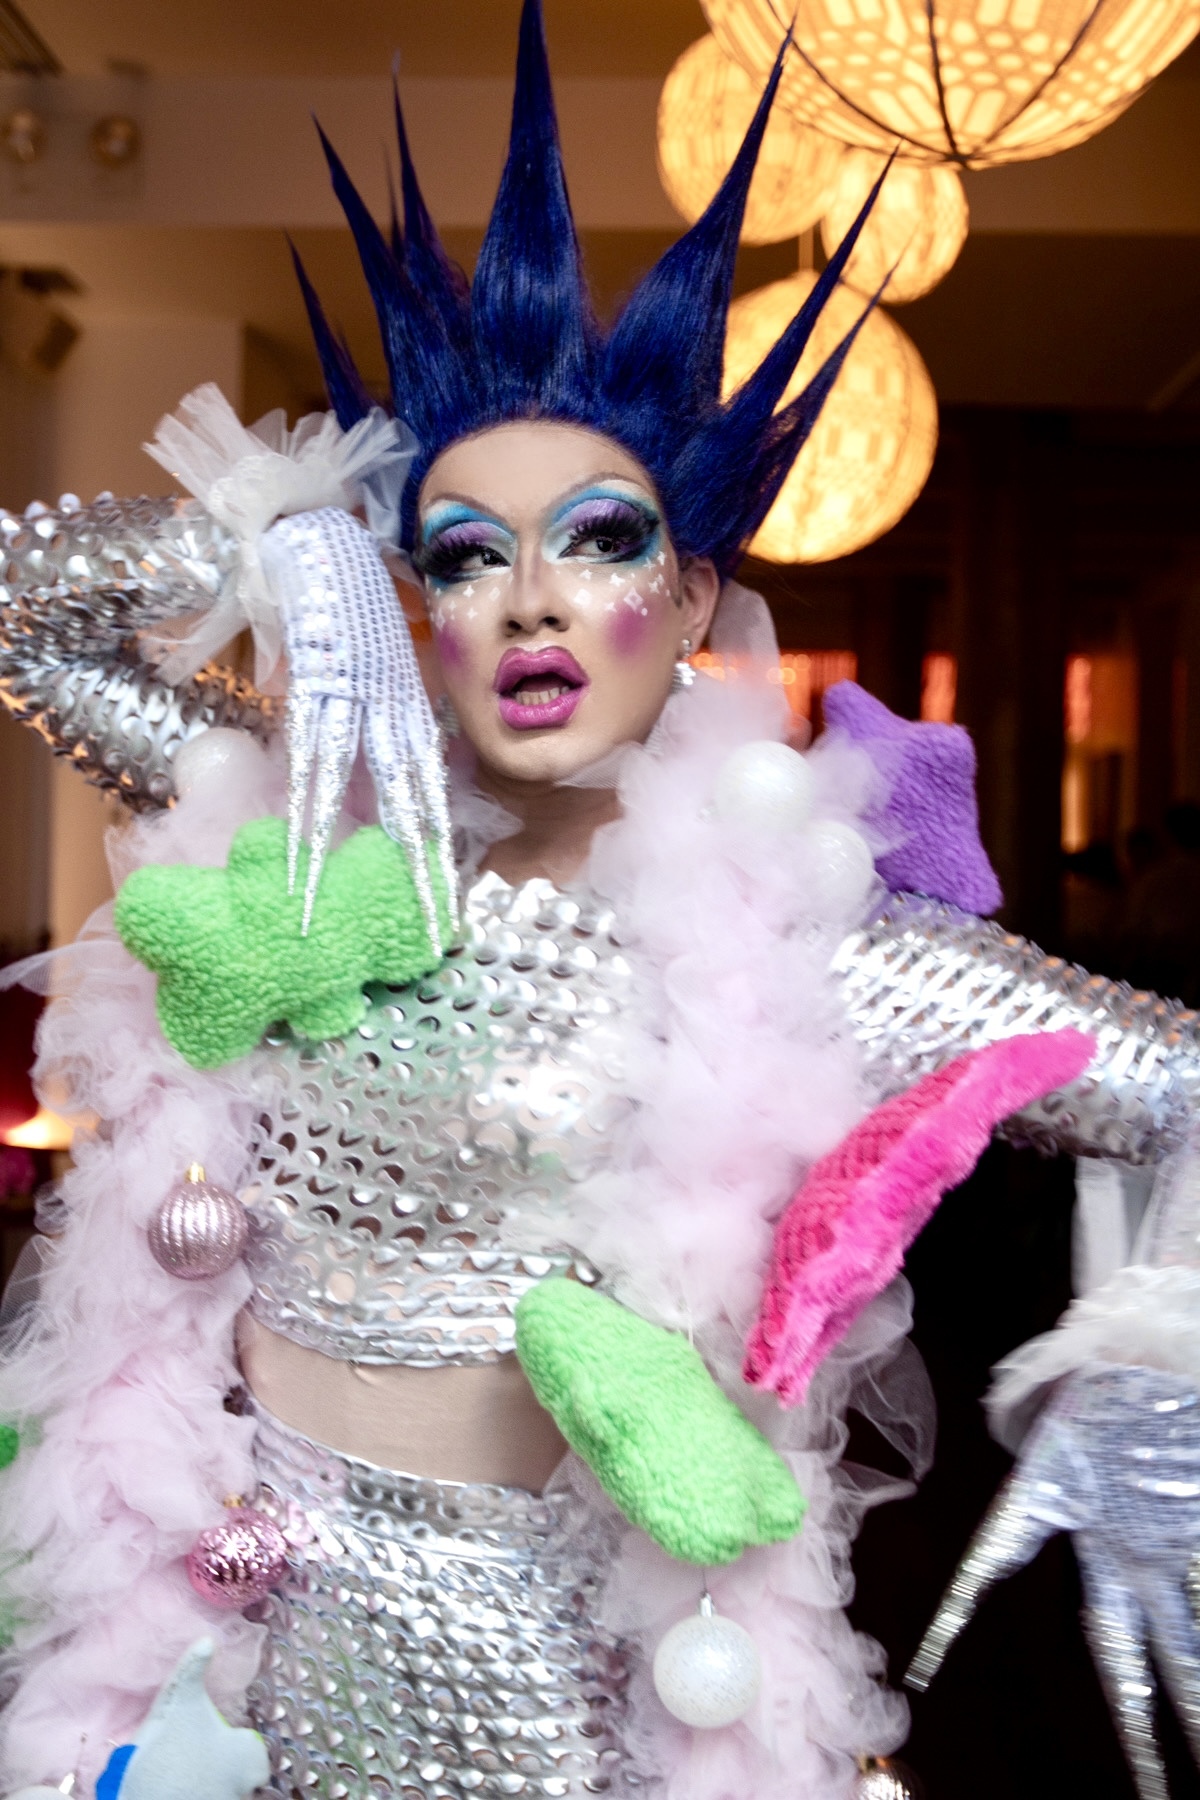 A drag performer with a purple/blue spiky wig.